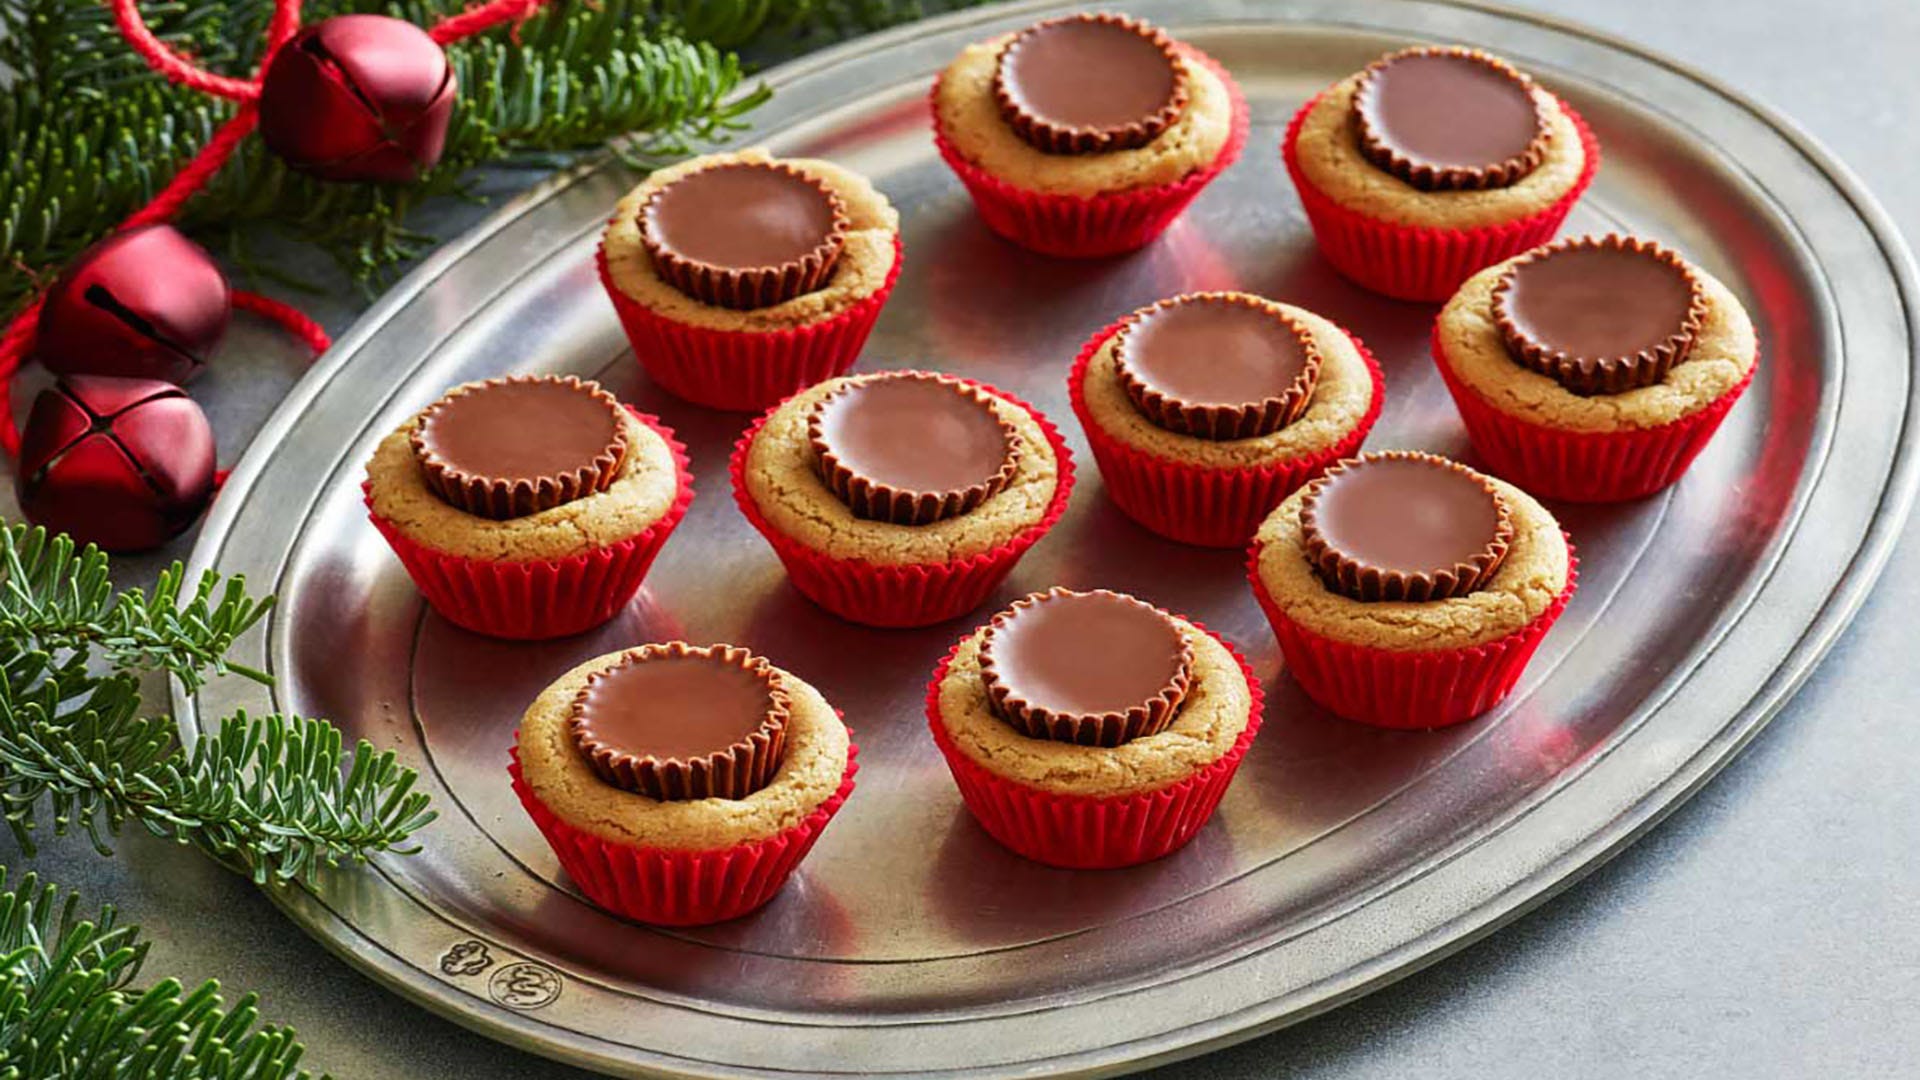 Reese's Peanut Butter Lovers Ultimate - Sweety Americans